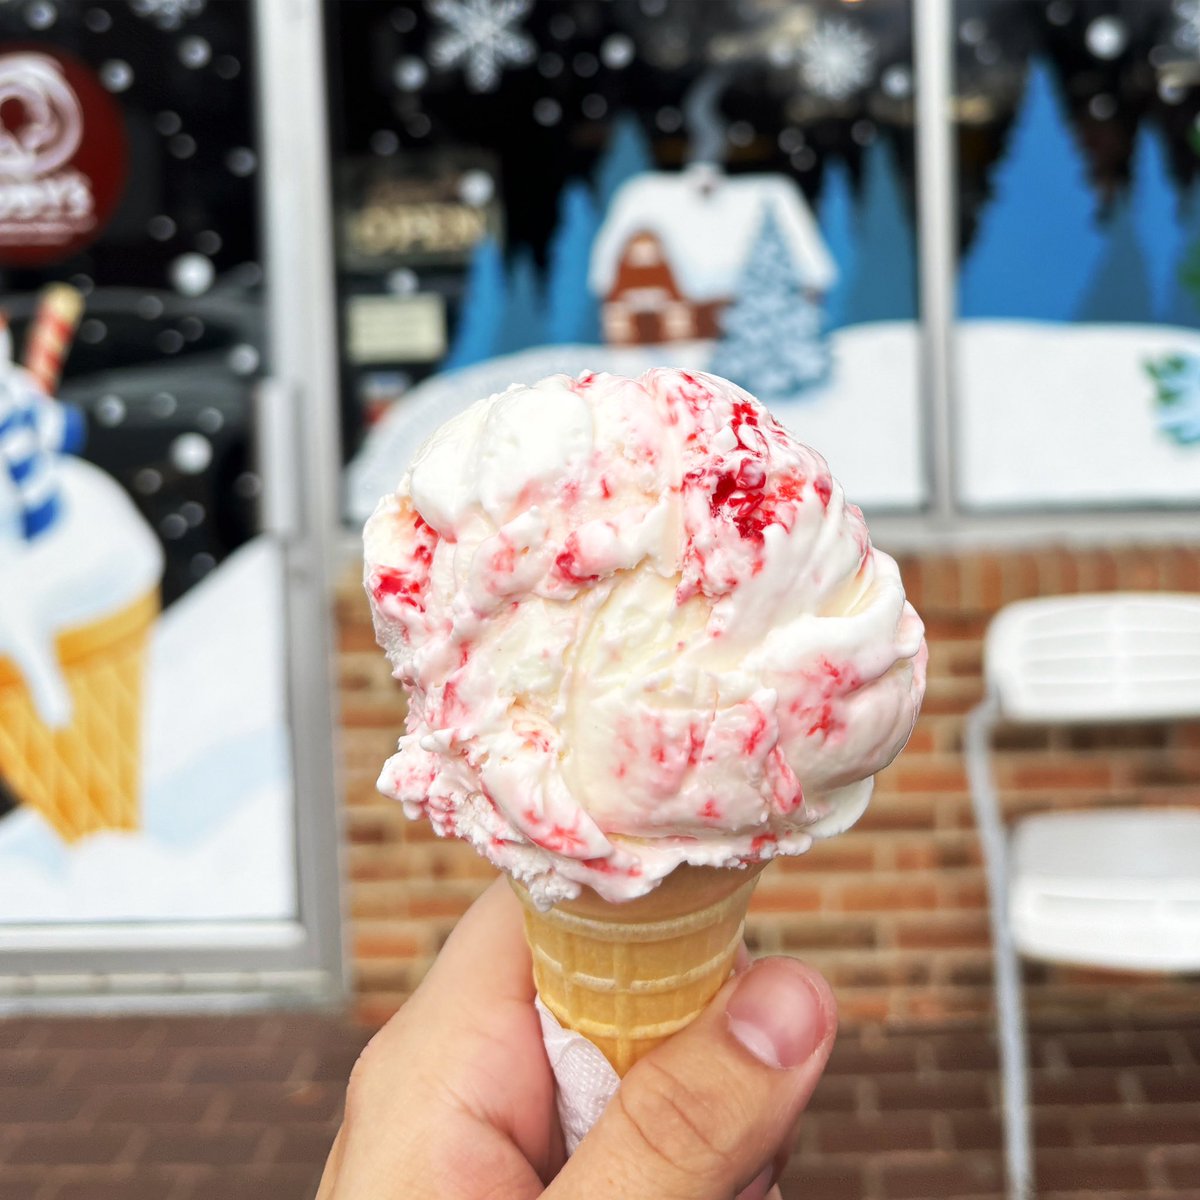 Now Scooping: Peppermint! Toby’s Peppermint is minty, creamy, and packed with crushed peppermint candy to give it that crunch you love! This is our last week open before closing for the year, so make sure to pint up to celebrate the holidays! #pepperminticecream #icecream